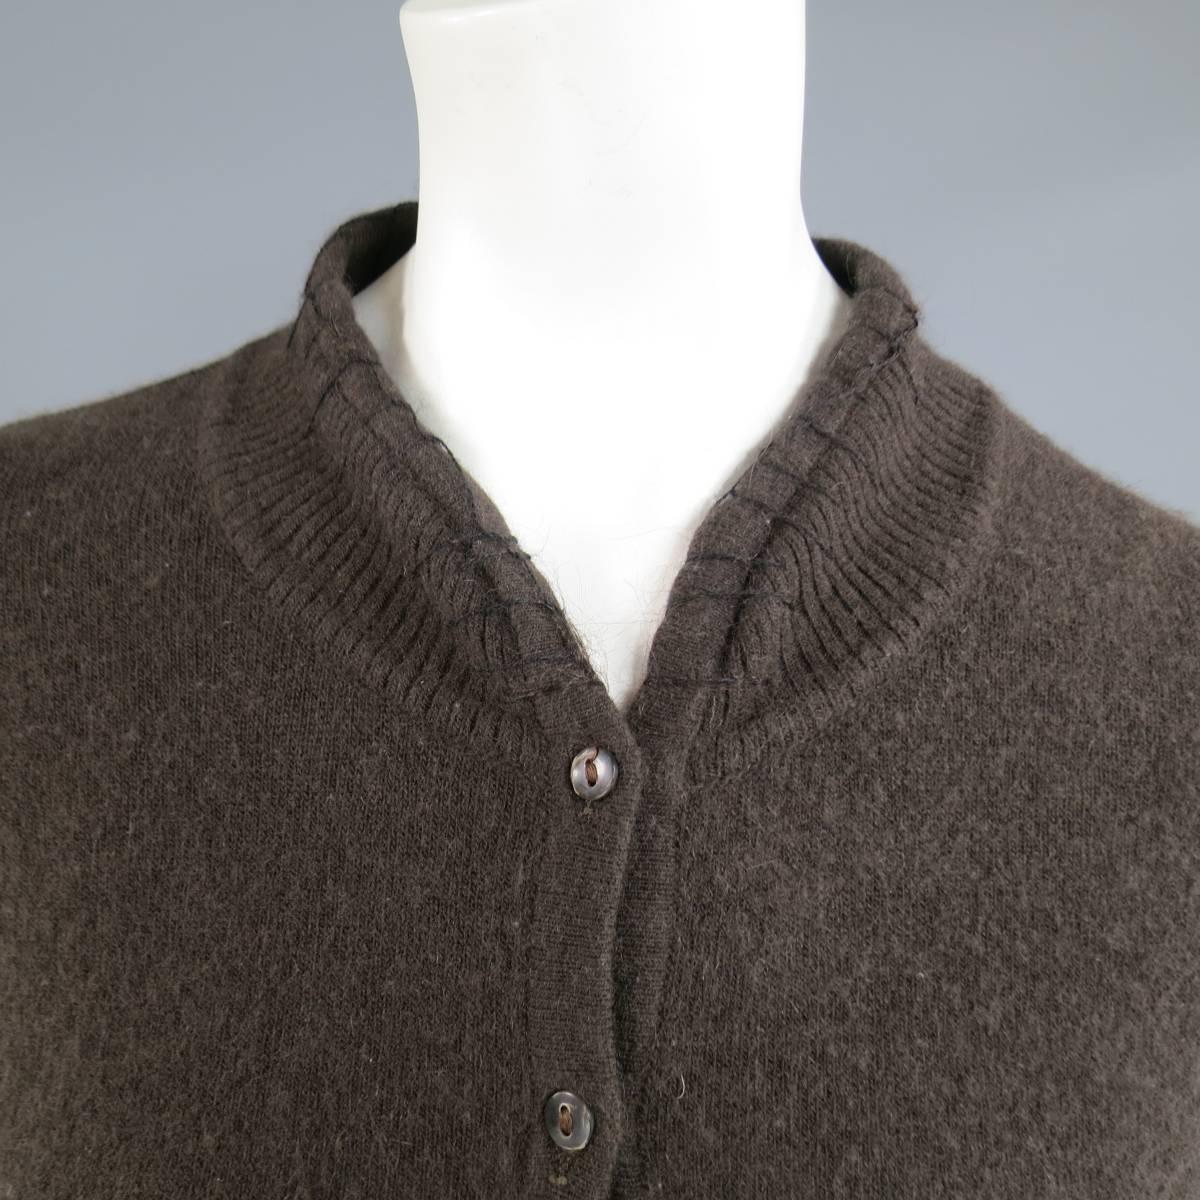 This rare JOHN GALLIANO cardigan comes in a soft brown angora blend knit and features a high collar with top stitch detail, embroidered cutout flowers, and extra long extended gathered sleeves. Made in Italy.
 
Good Pre-Owned Condition.
Marked: